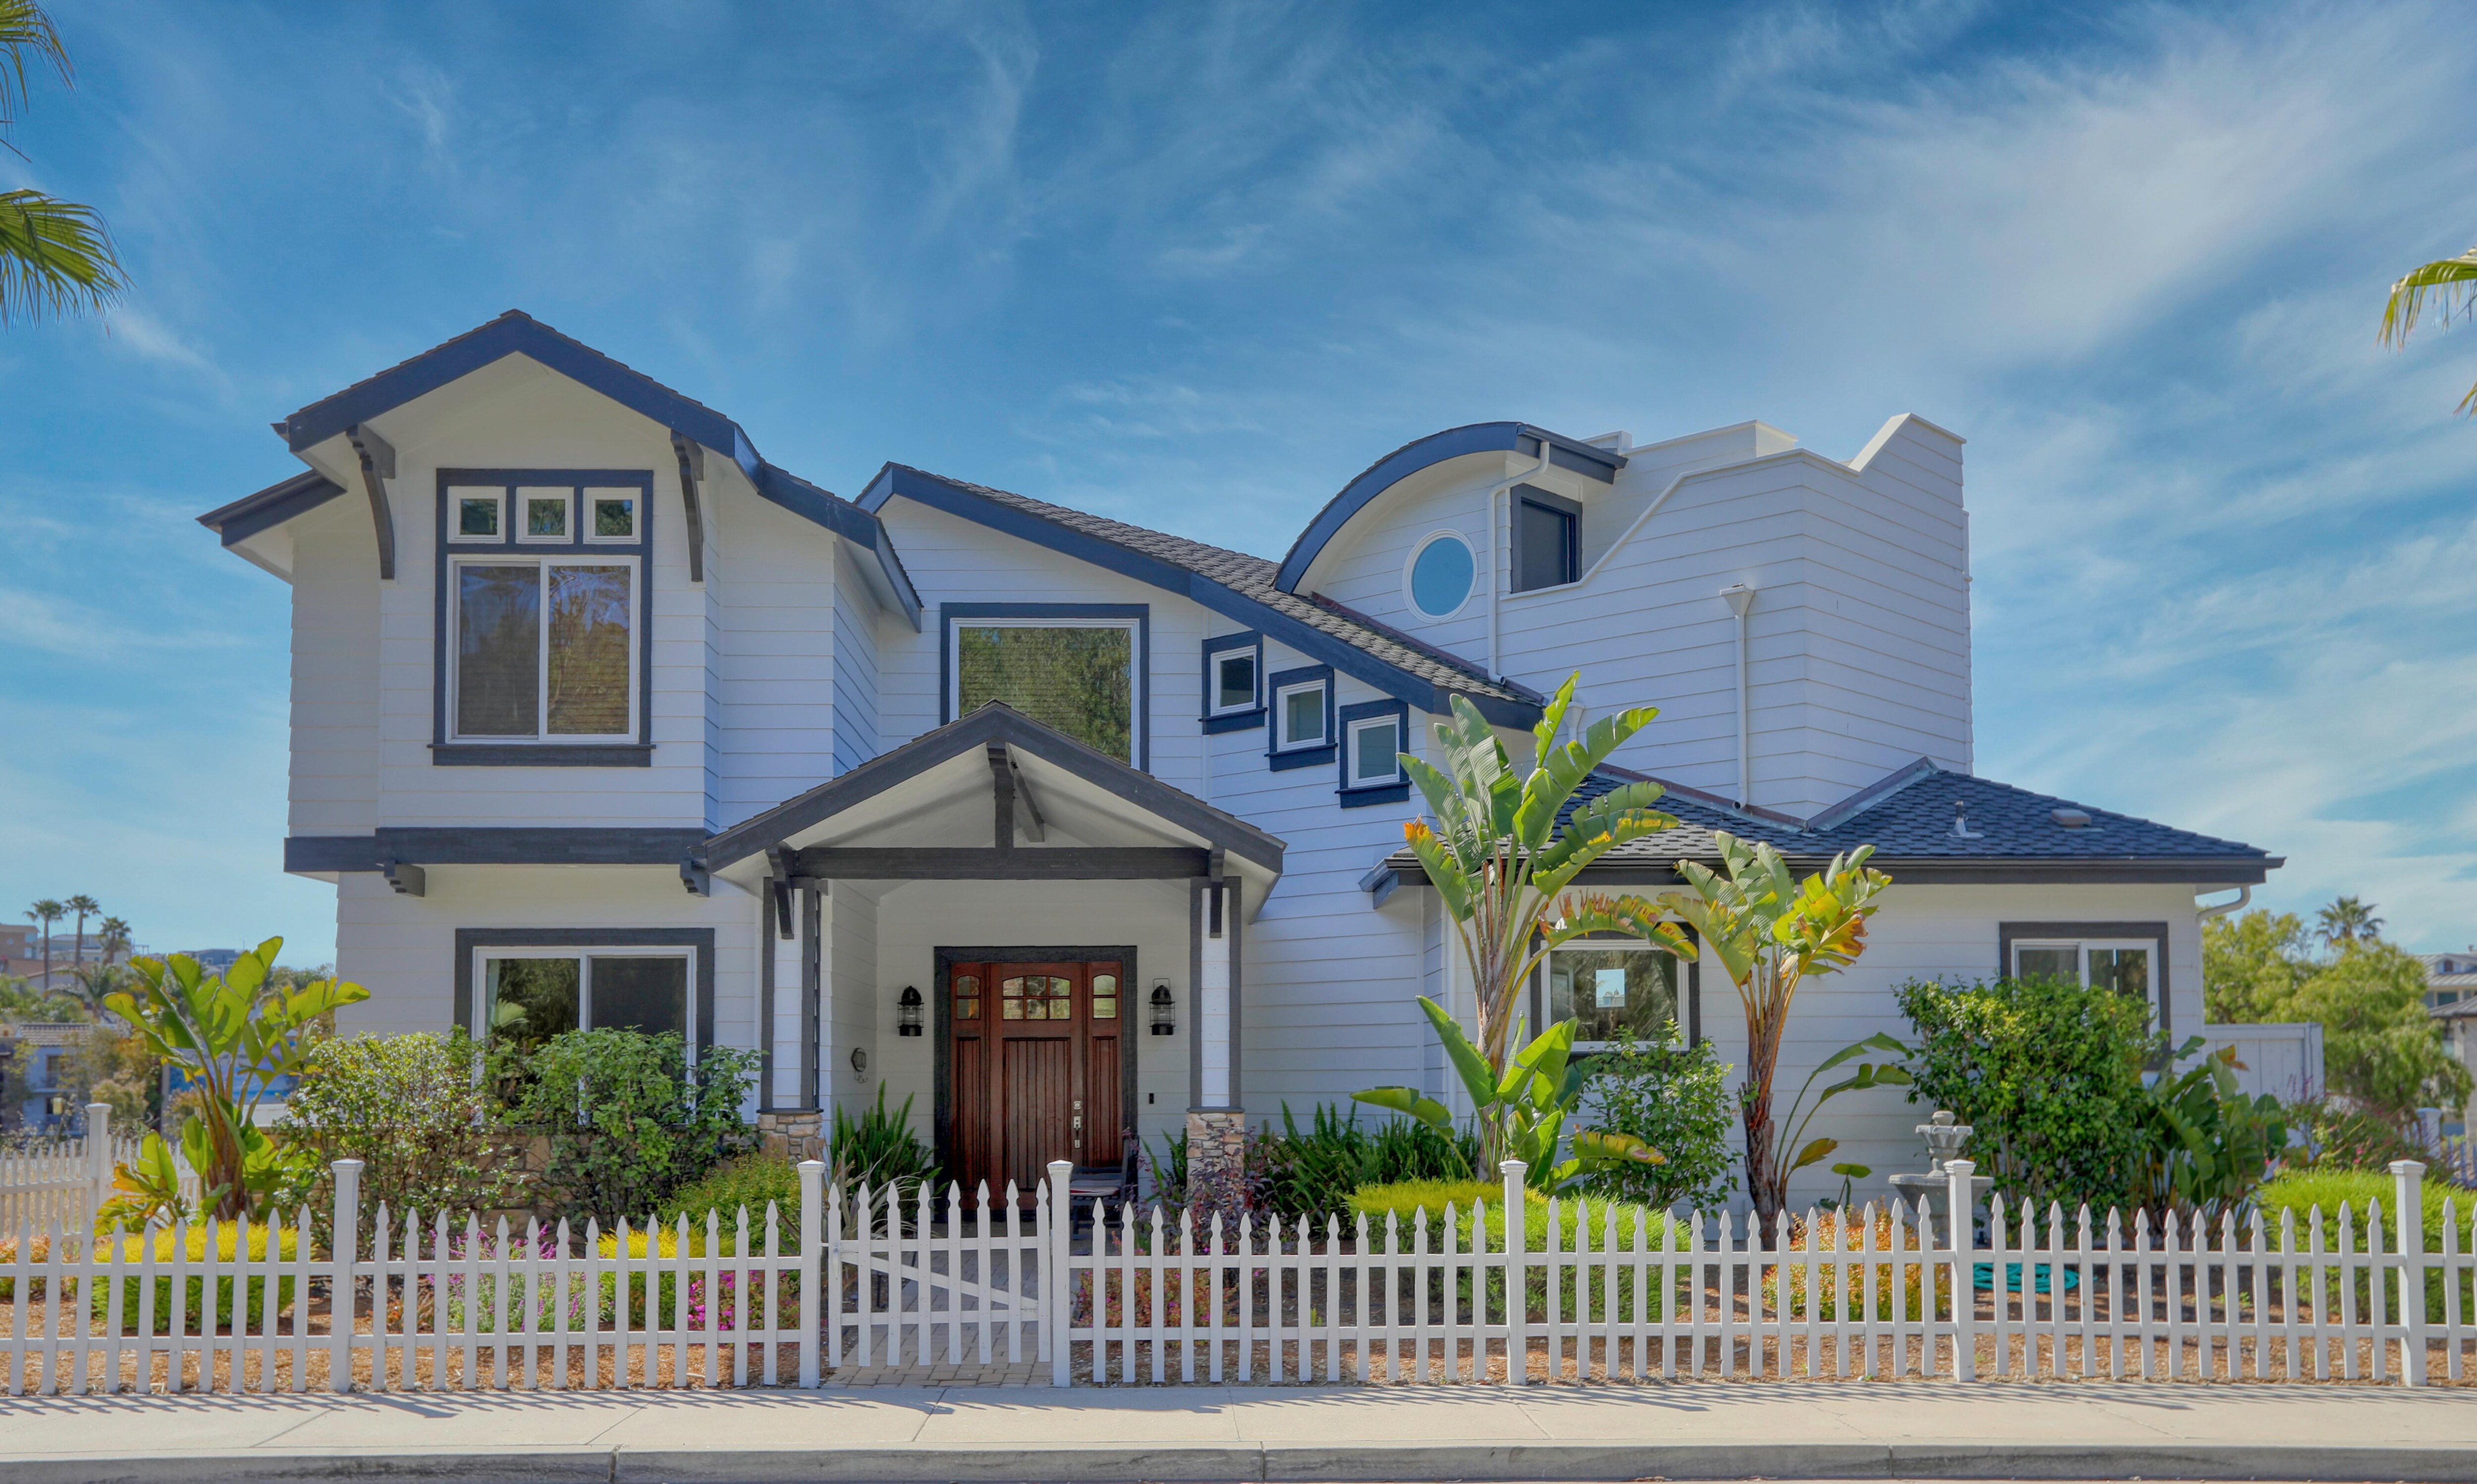 Gather@Avila is located on Avila Beach Drive. The home has 4 bedrooms, 3 bathrooms and onsite parking for 4 autos. This large luxury family home is steps from Avila Beach Golf Resort, beach, play ground and downtown Avila Beach.